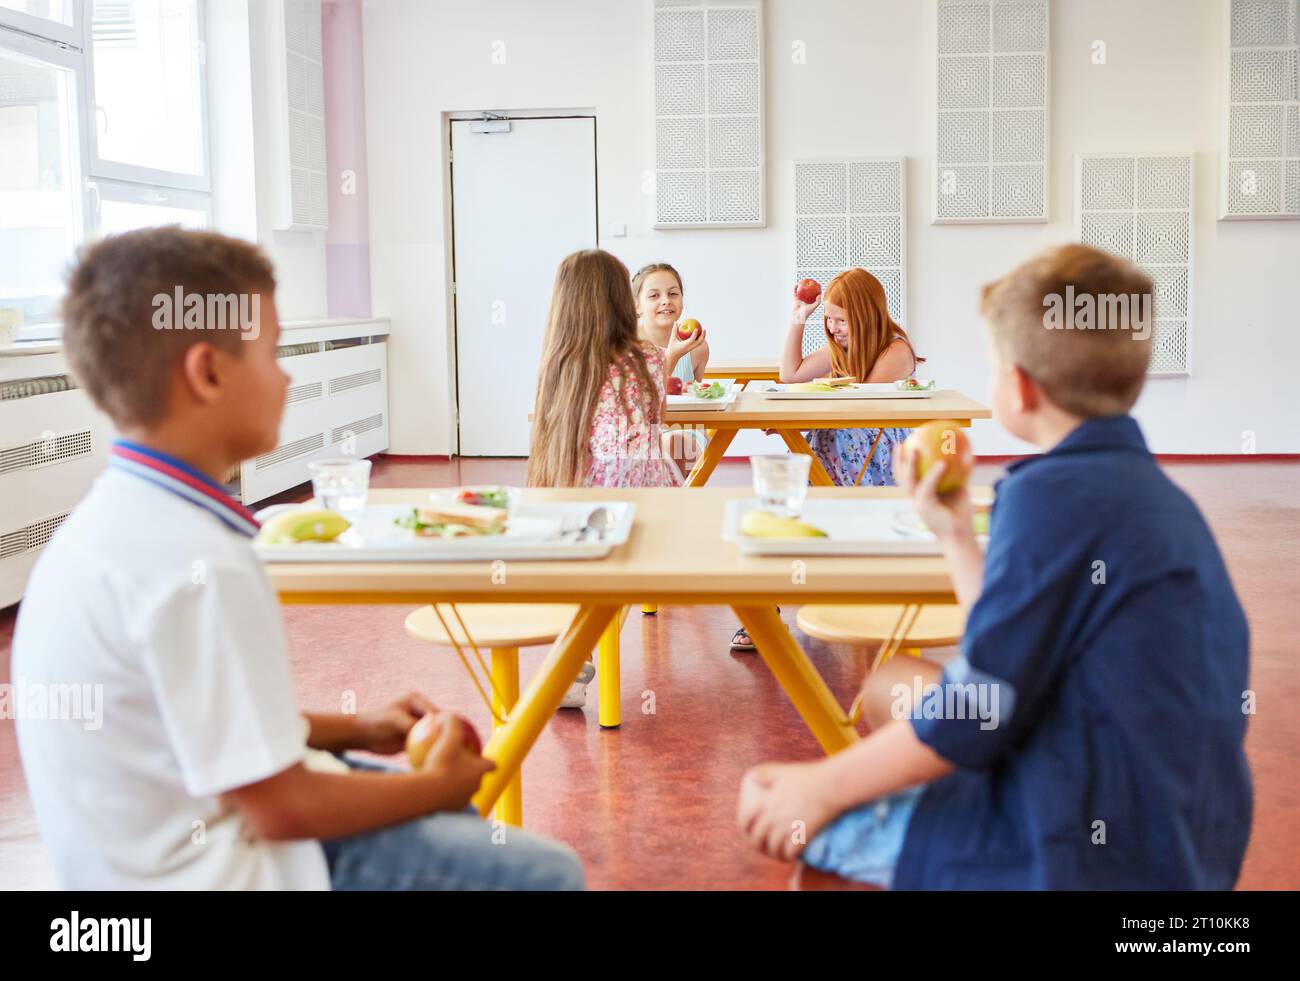 Students enjoying while having food during lunch break at school cafeteria Stock Photo